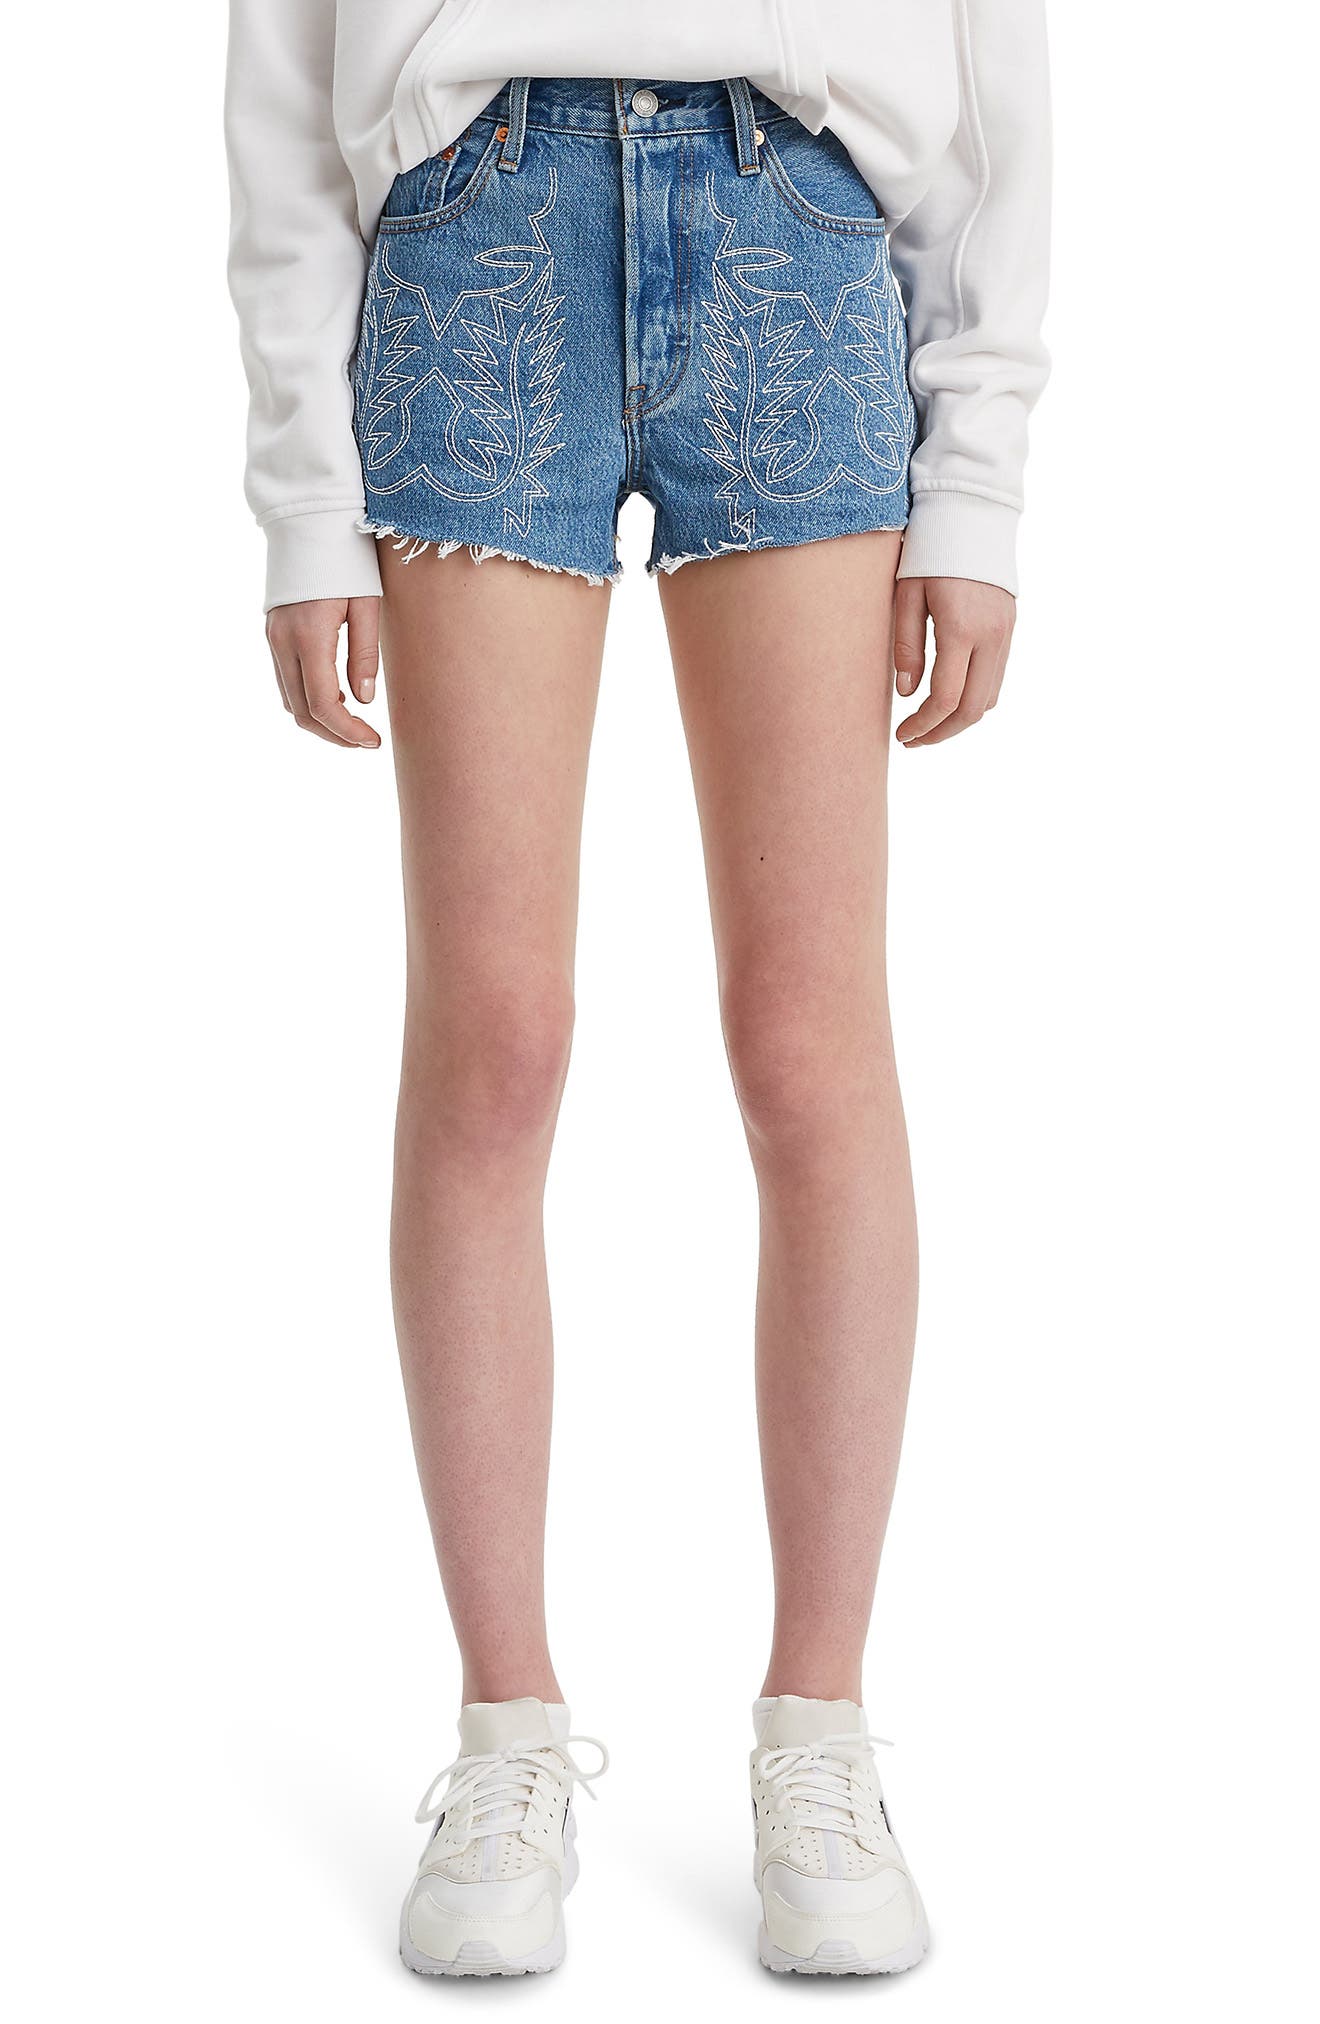 levi's 501 high rise short bring to light